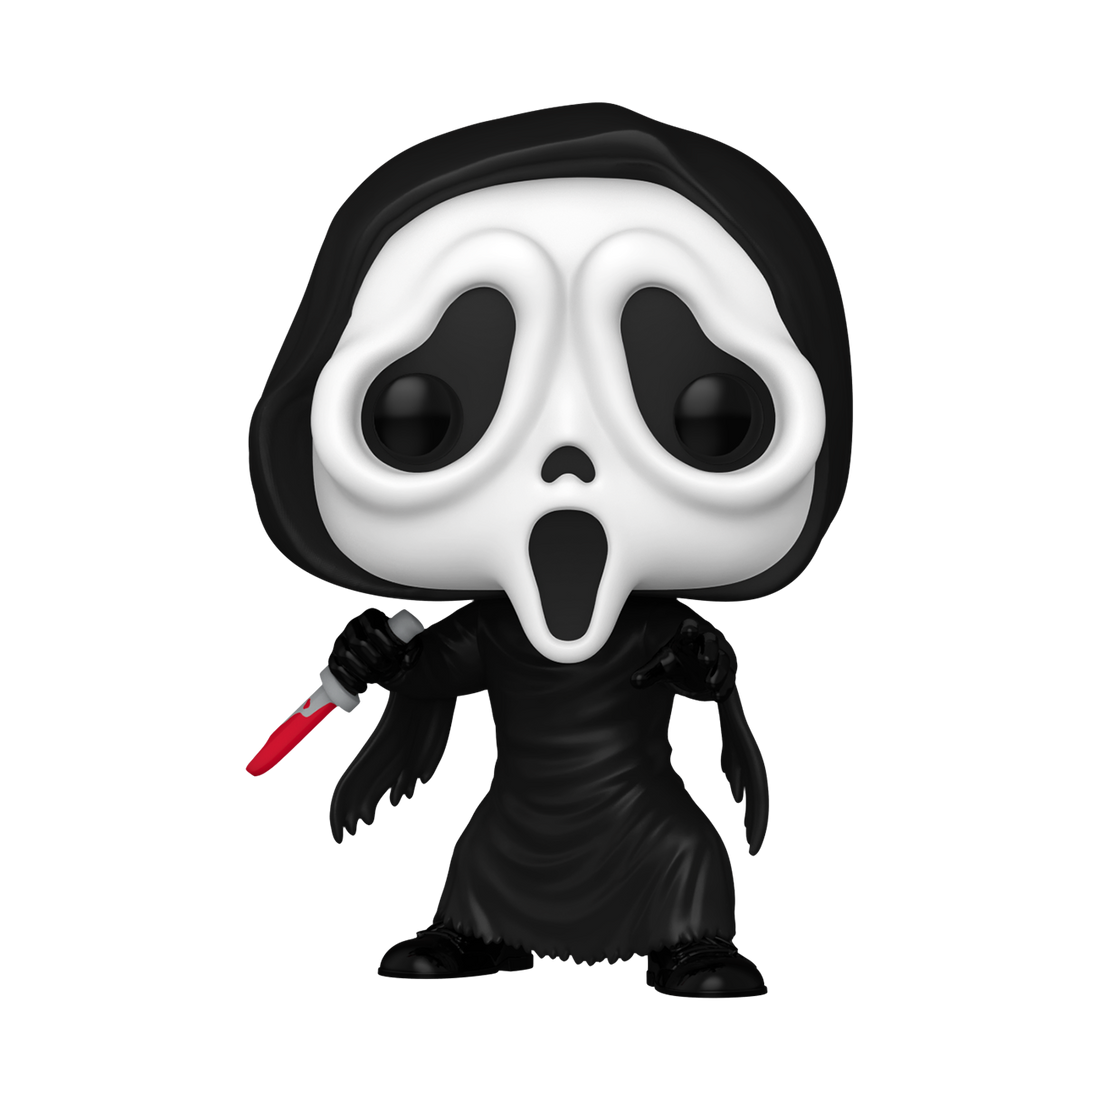 Funko Pop! Movies Ghost Face 1607 Ghost Face Funko